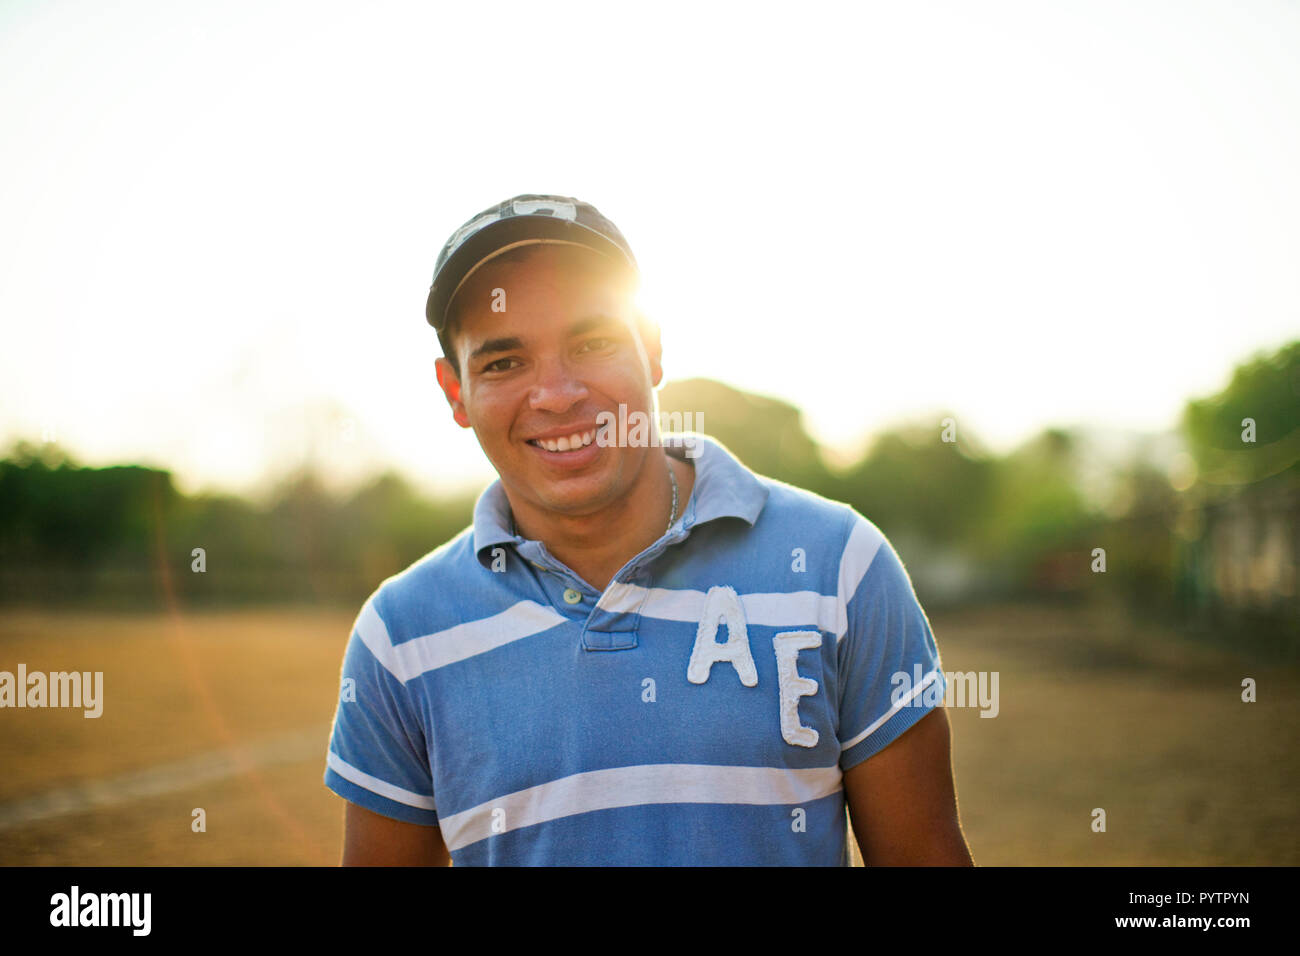 Portrait of a smiling young man standing on a grassy sports field in the sunshine. Stock Photo